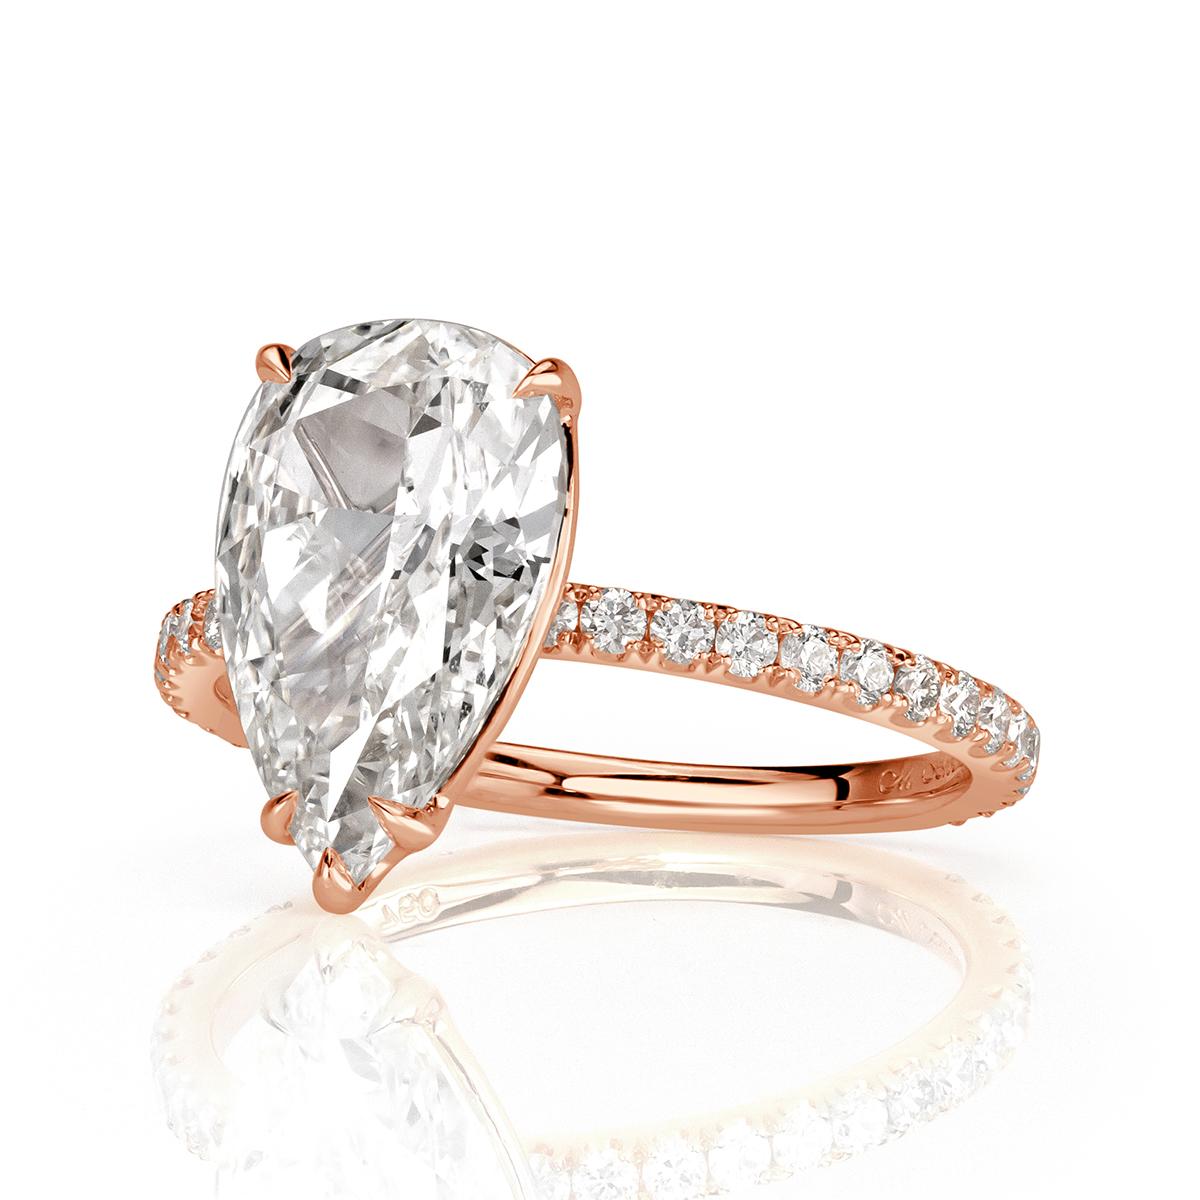 Custom created in 18k rose gold, this stunning diamond engagement ring showcases a gorgeous 2.03ct pear shaped center diamond, GIA certified at I-SI1. It faces up white and is perfectly eye clean in addition of measuring an incredible 12.14 x 7.43mm